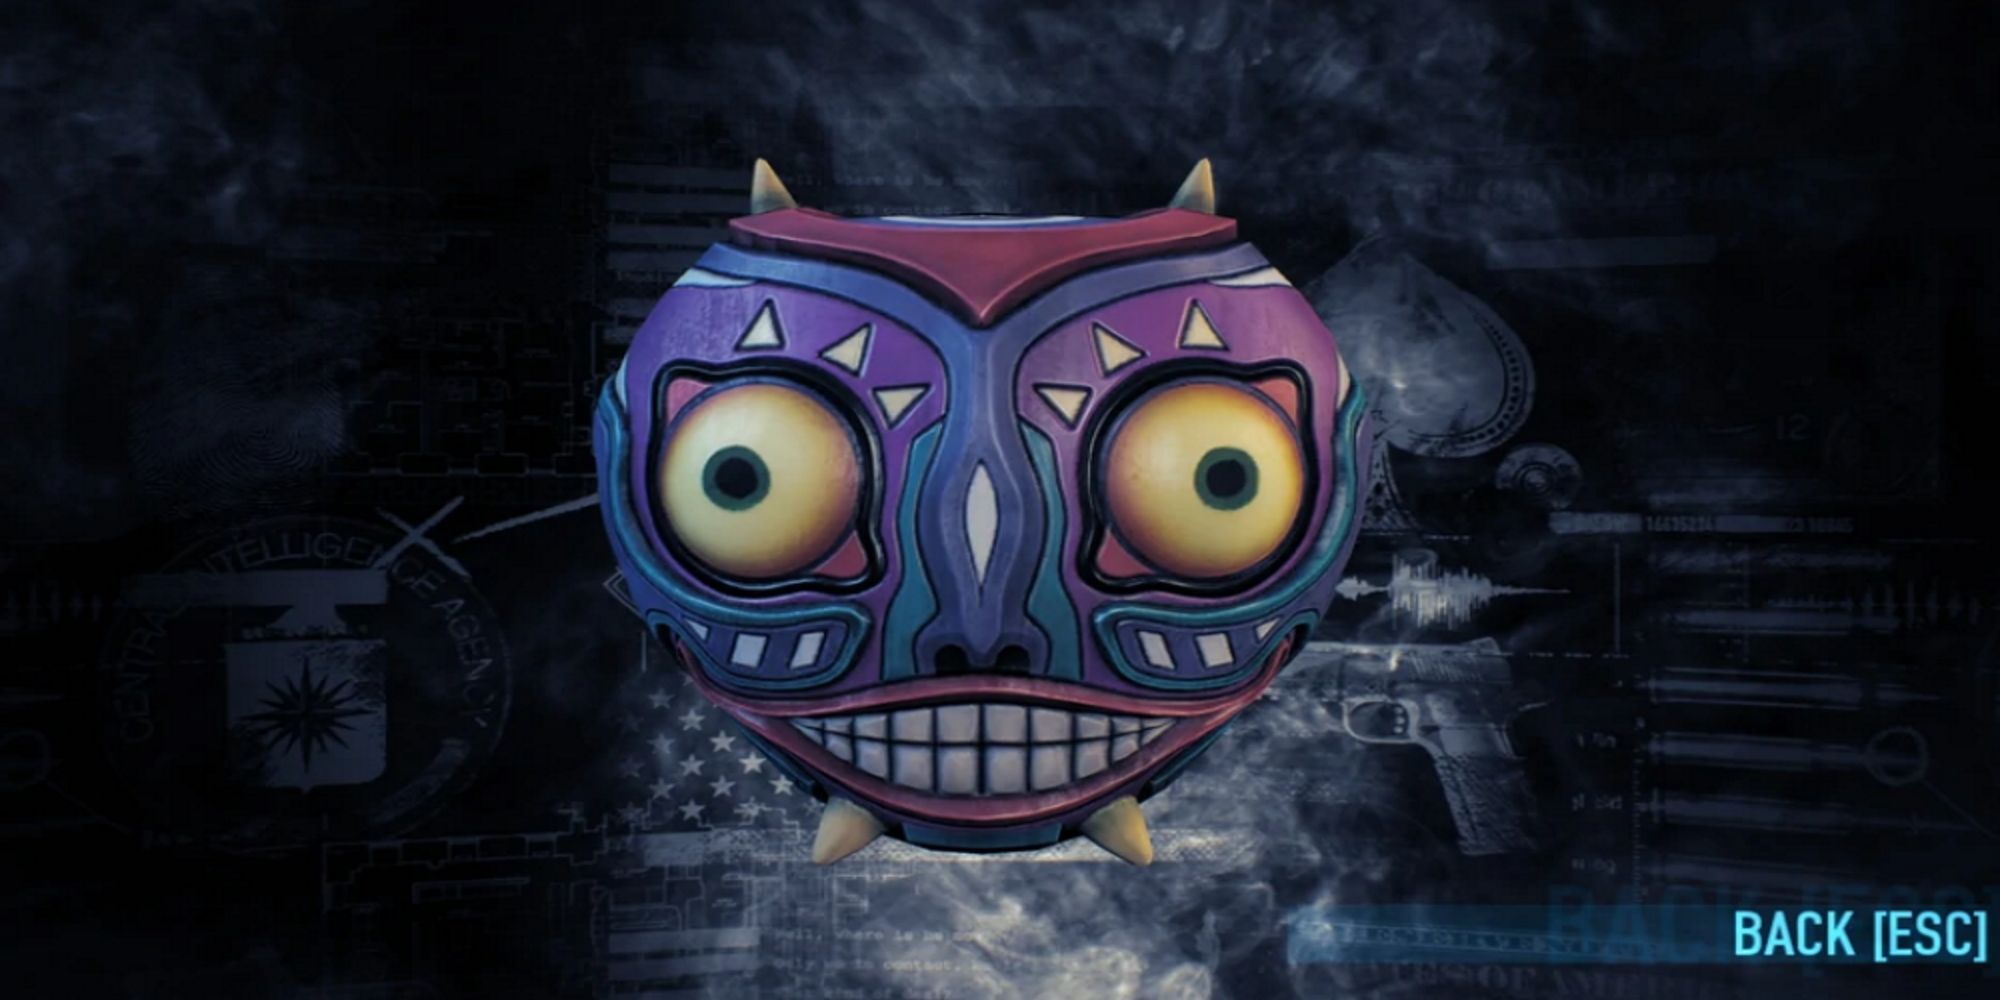 Mask of the Moon mask from PAYDAY 2